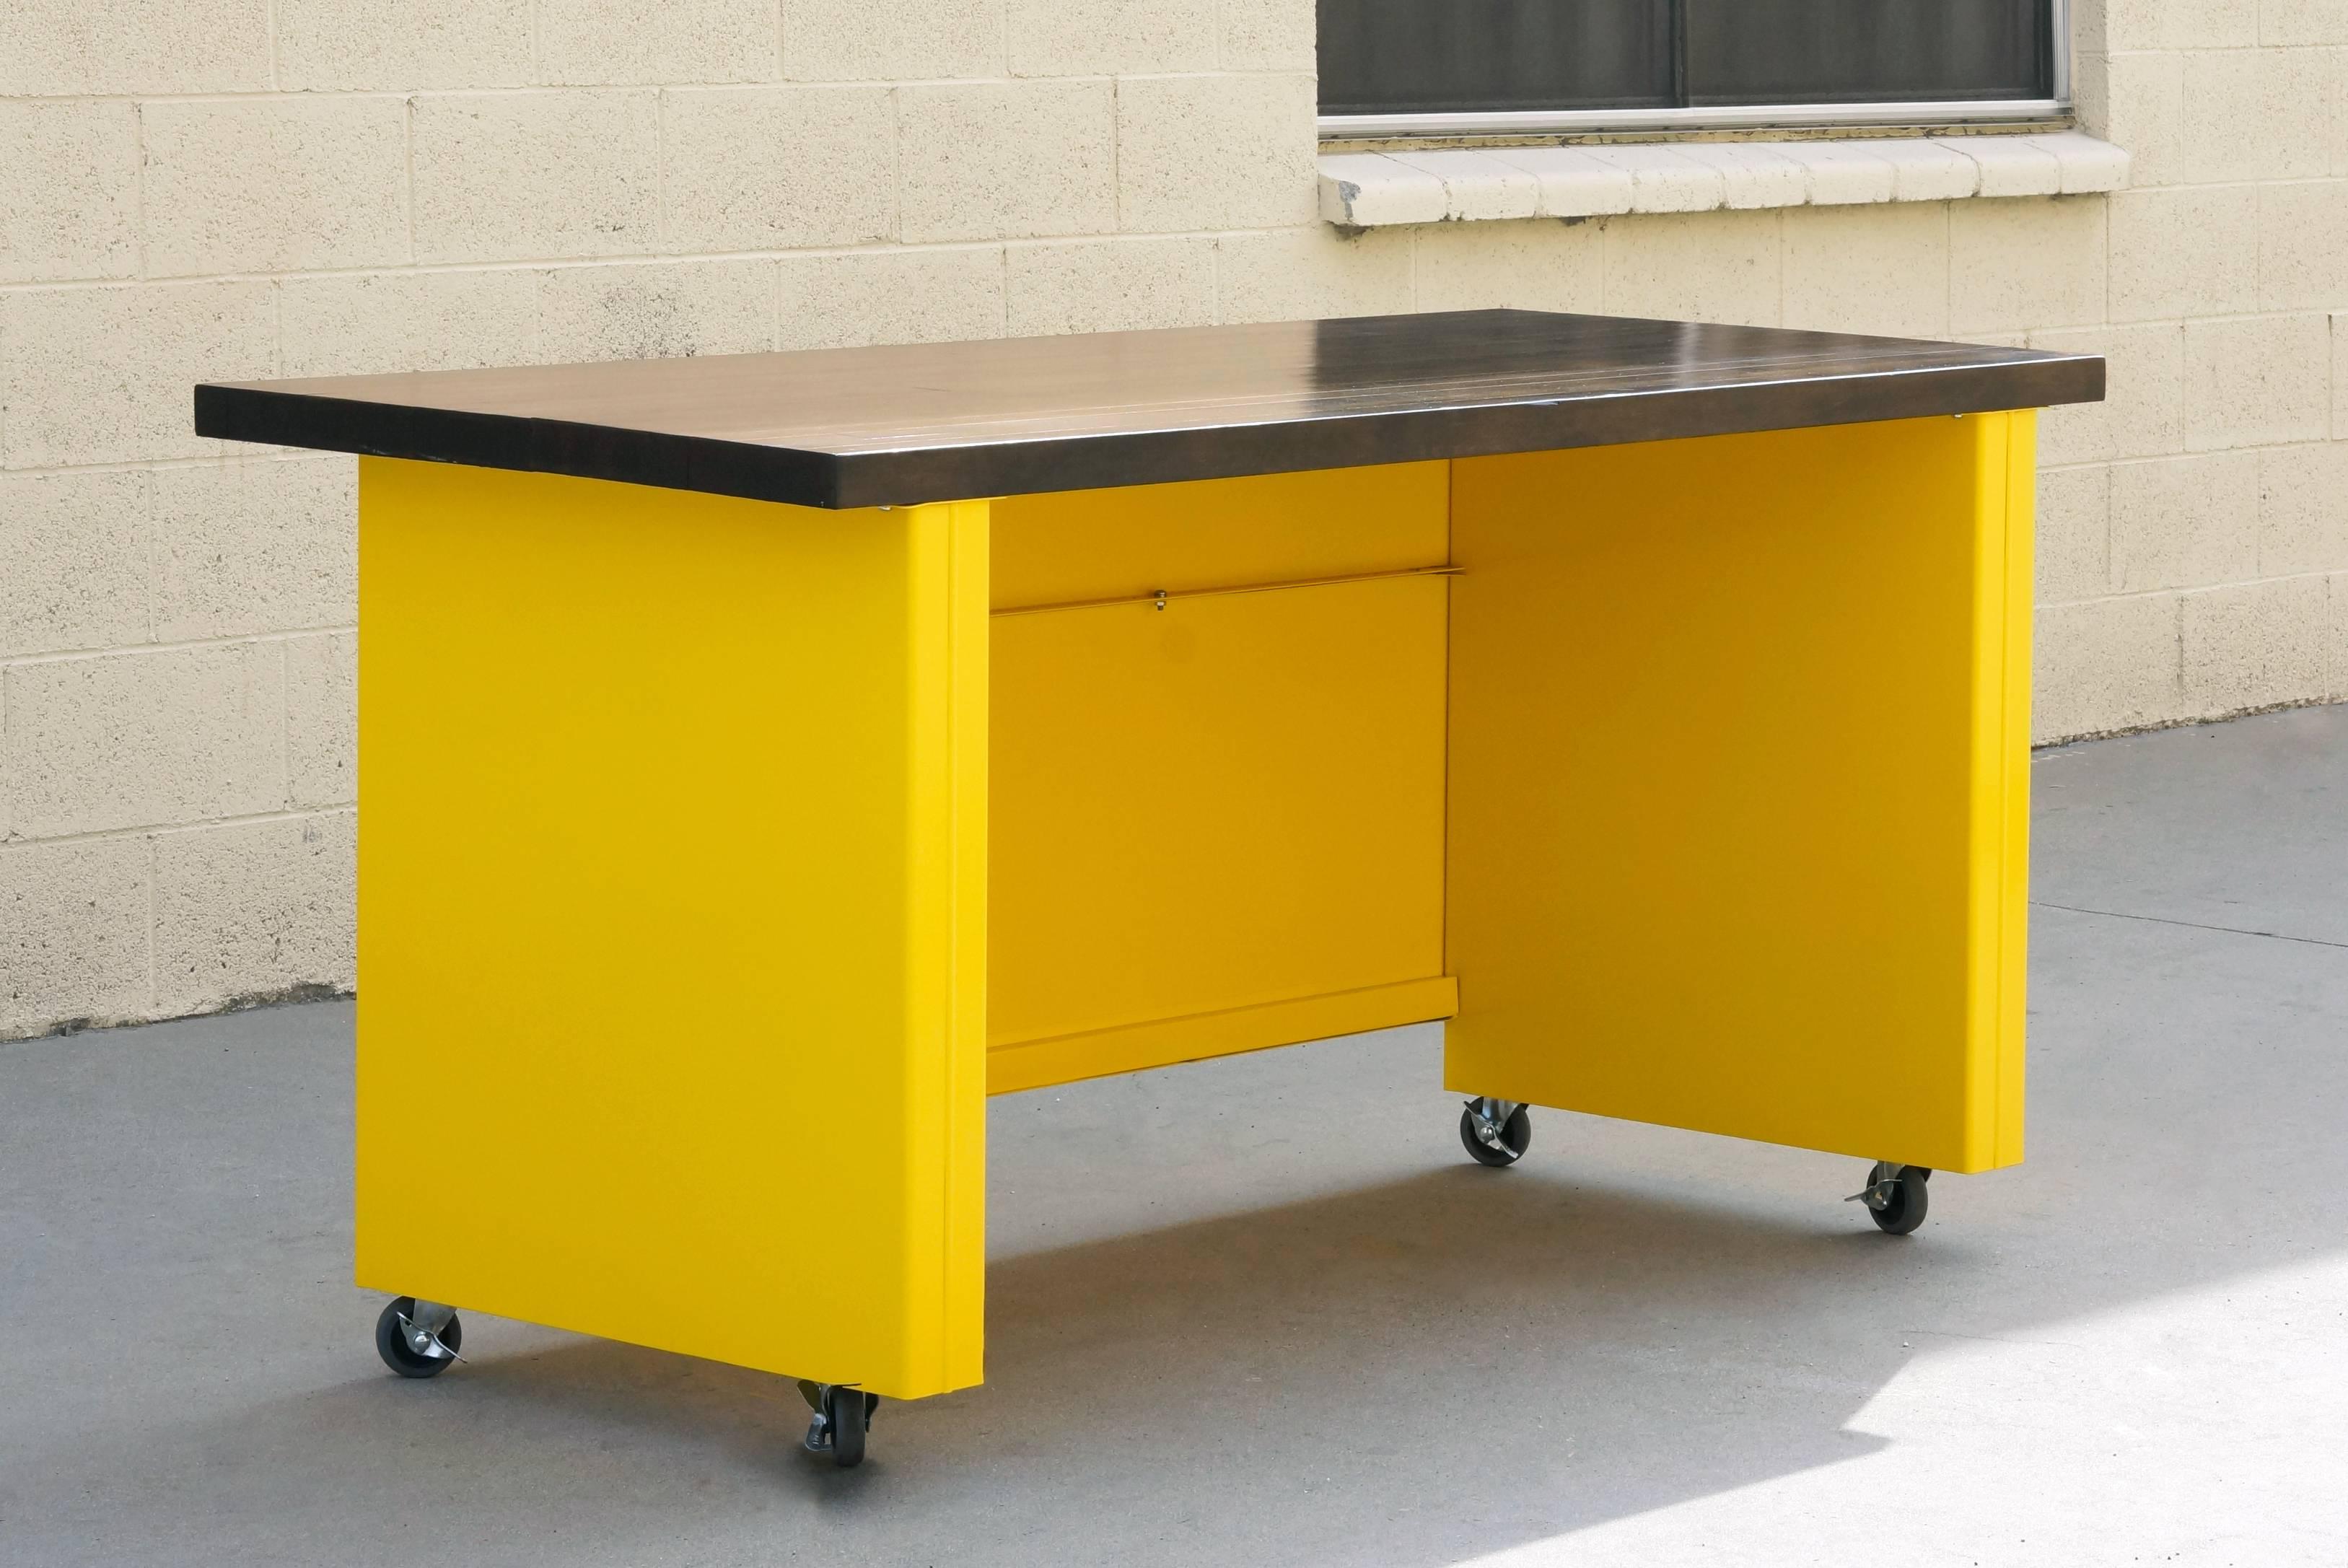 Excellent (and most unusual) 1950s steel workbench table. We refinished this beauty in 